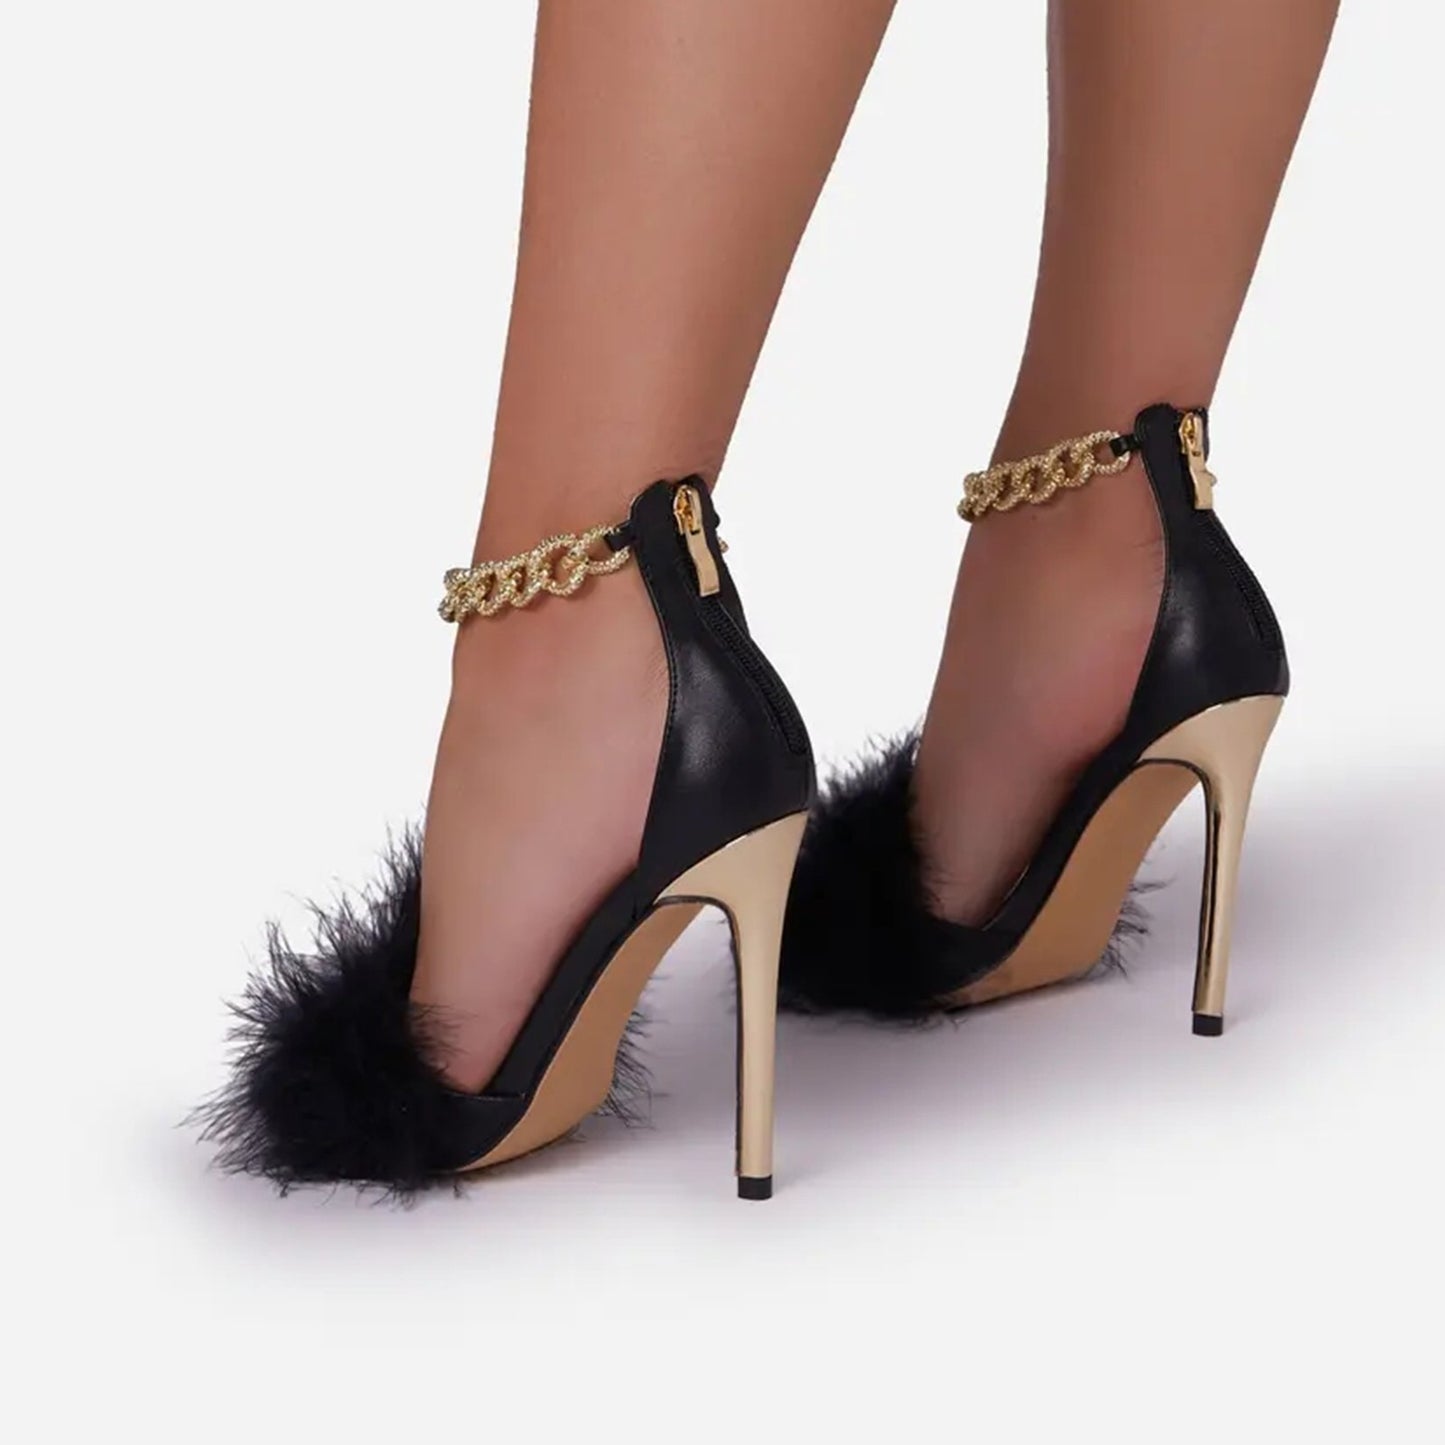 Black Feather Pointed-Toe Sandals With A Gold Ankle Strap